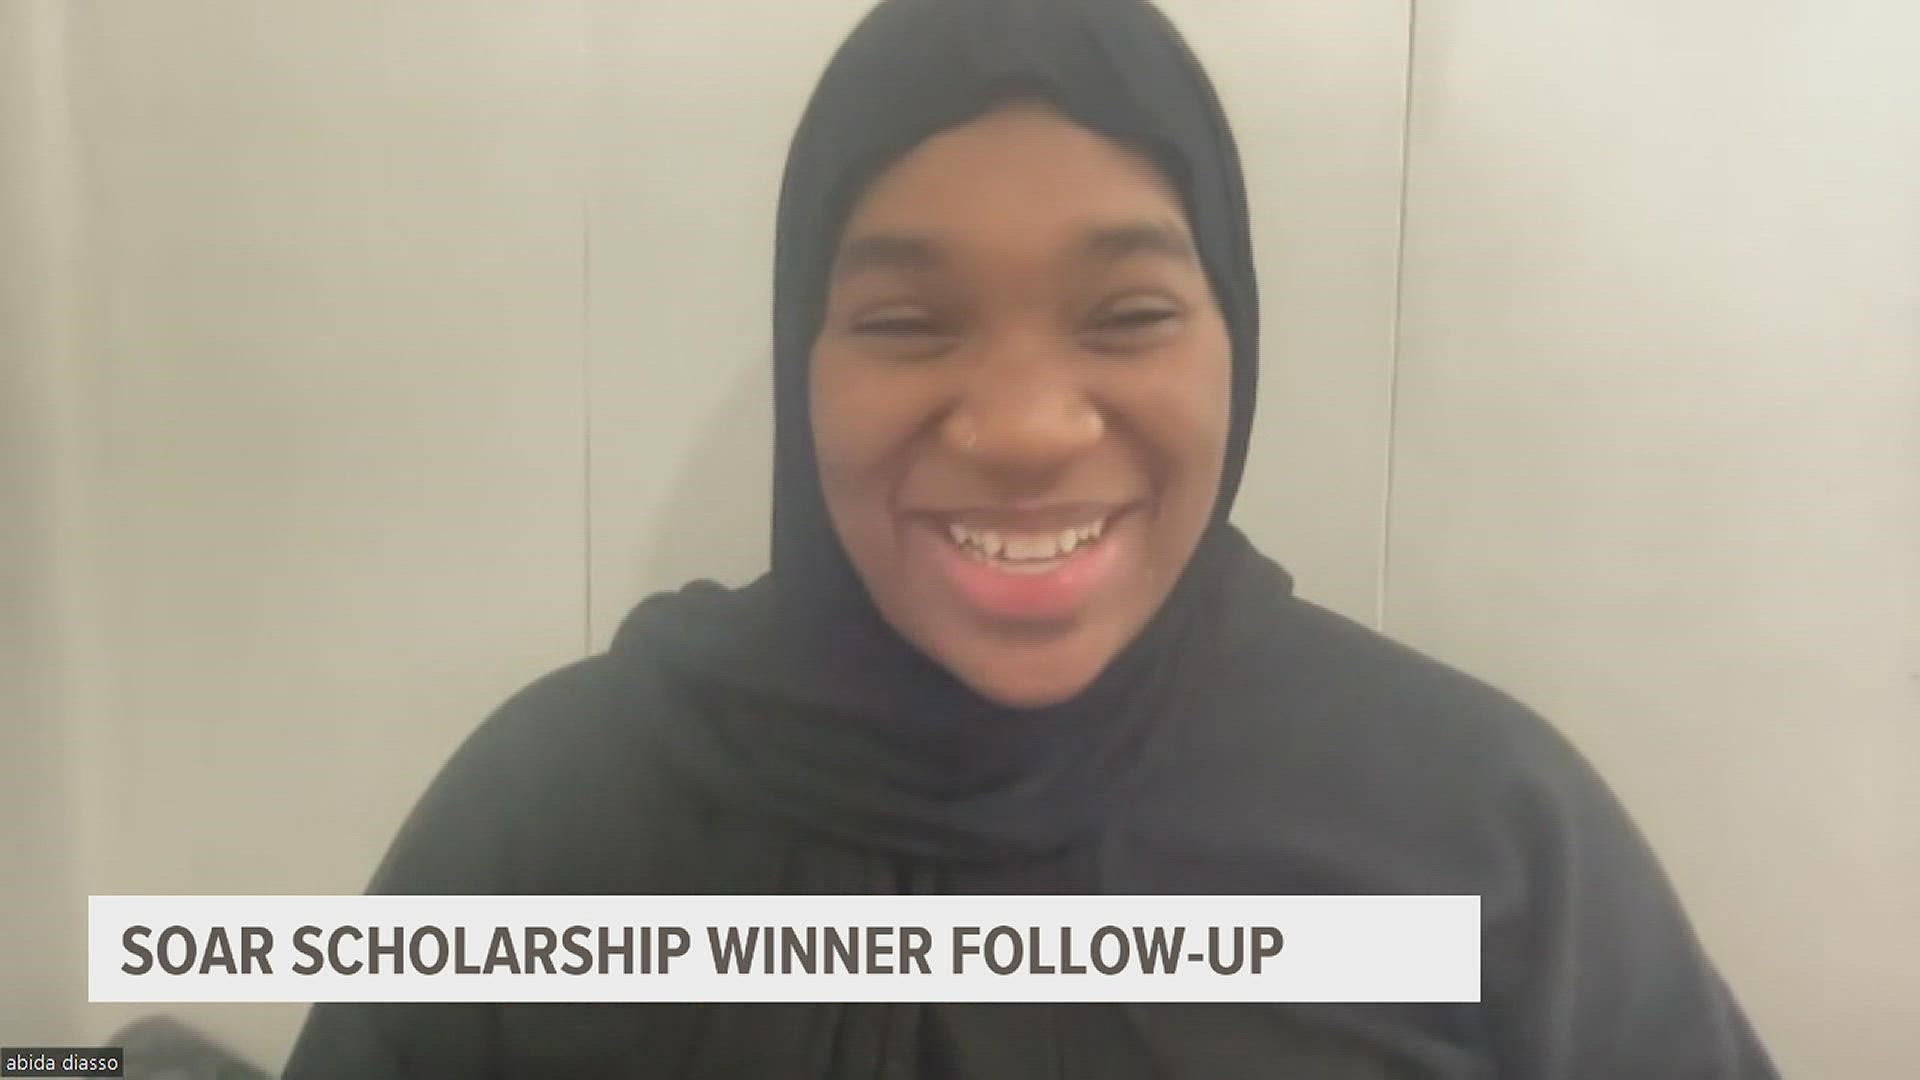 Abida Diasso won one of the SOAR scholarships by The Sedona Group and WQAD News 8 in 2021.